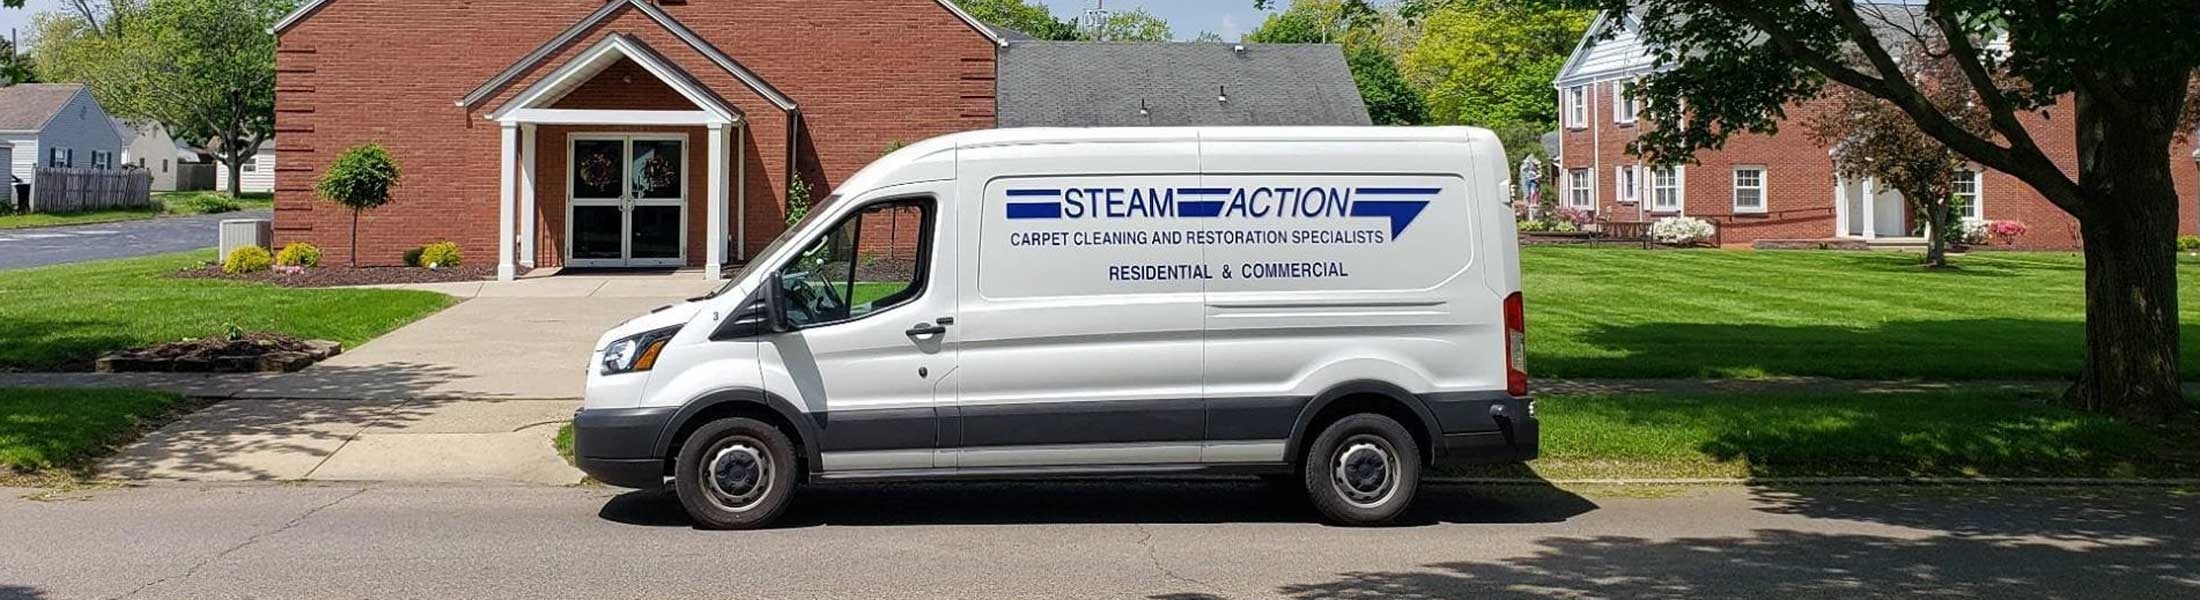 Locally Owned Steam Action Carpet Cleaning